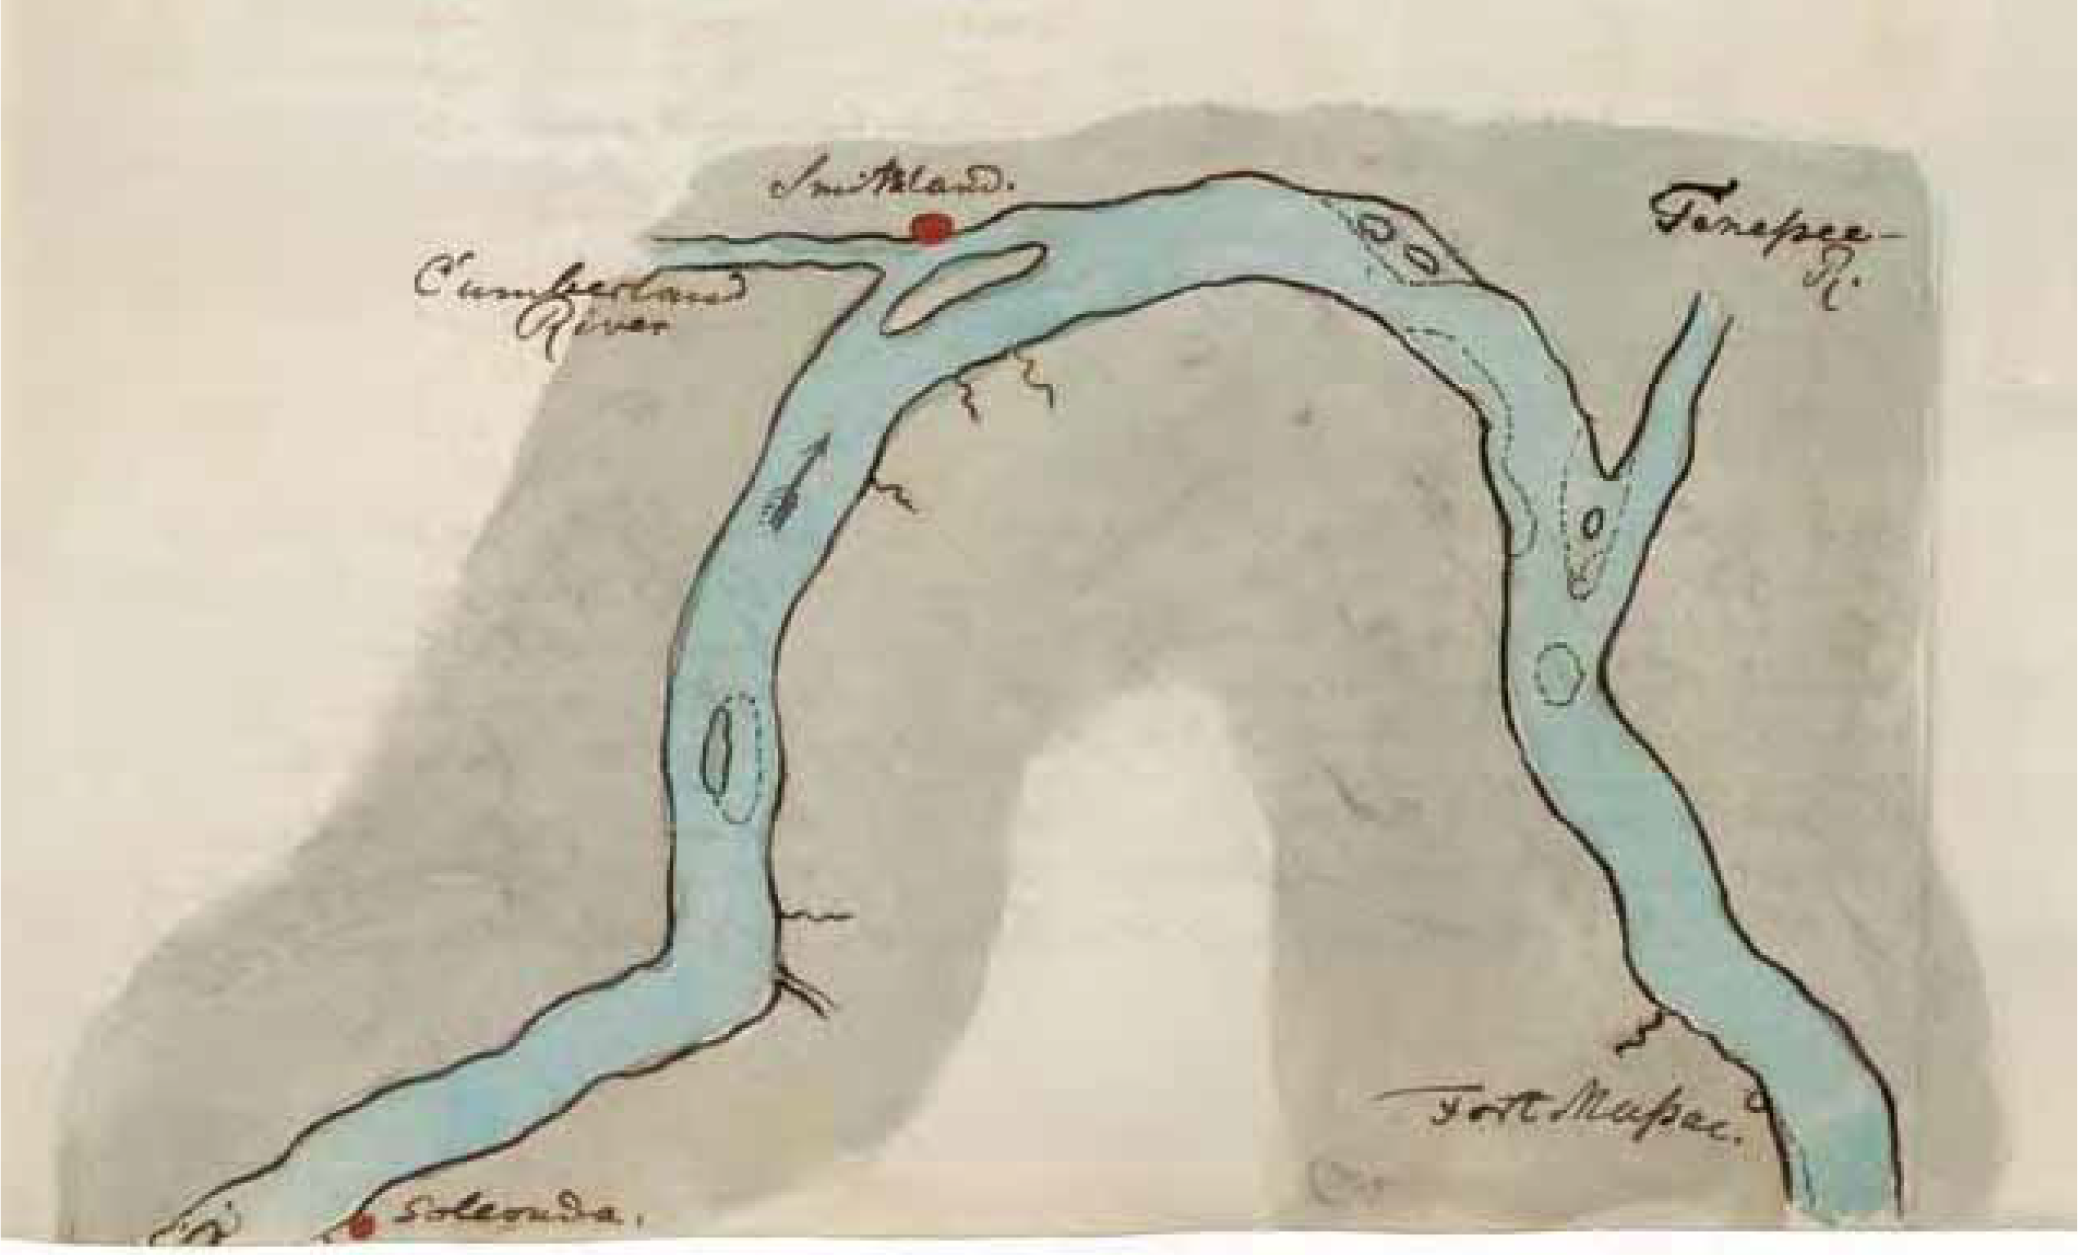 Fig. 6.11. Map showing the course of the Ohio River from Golconda to Fort Massac,